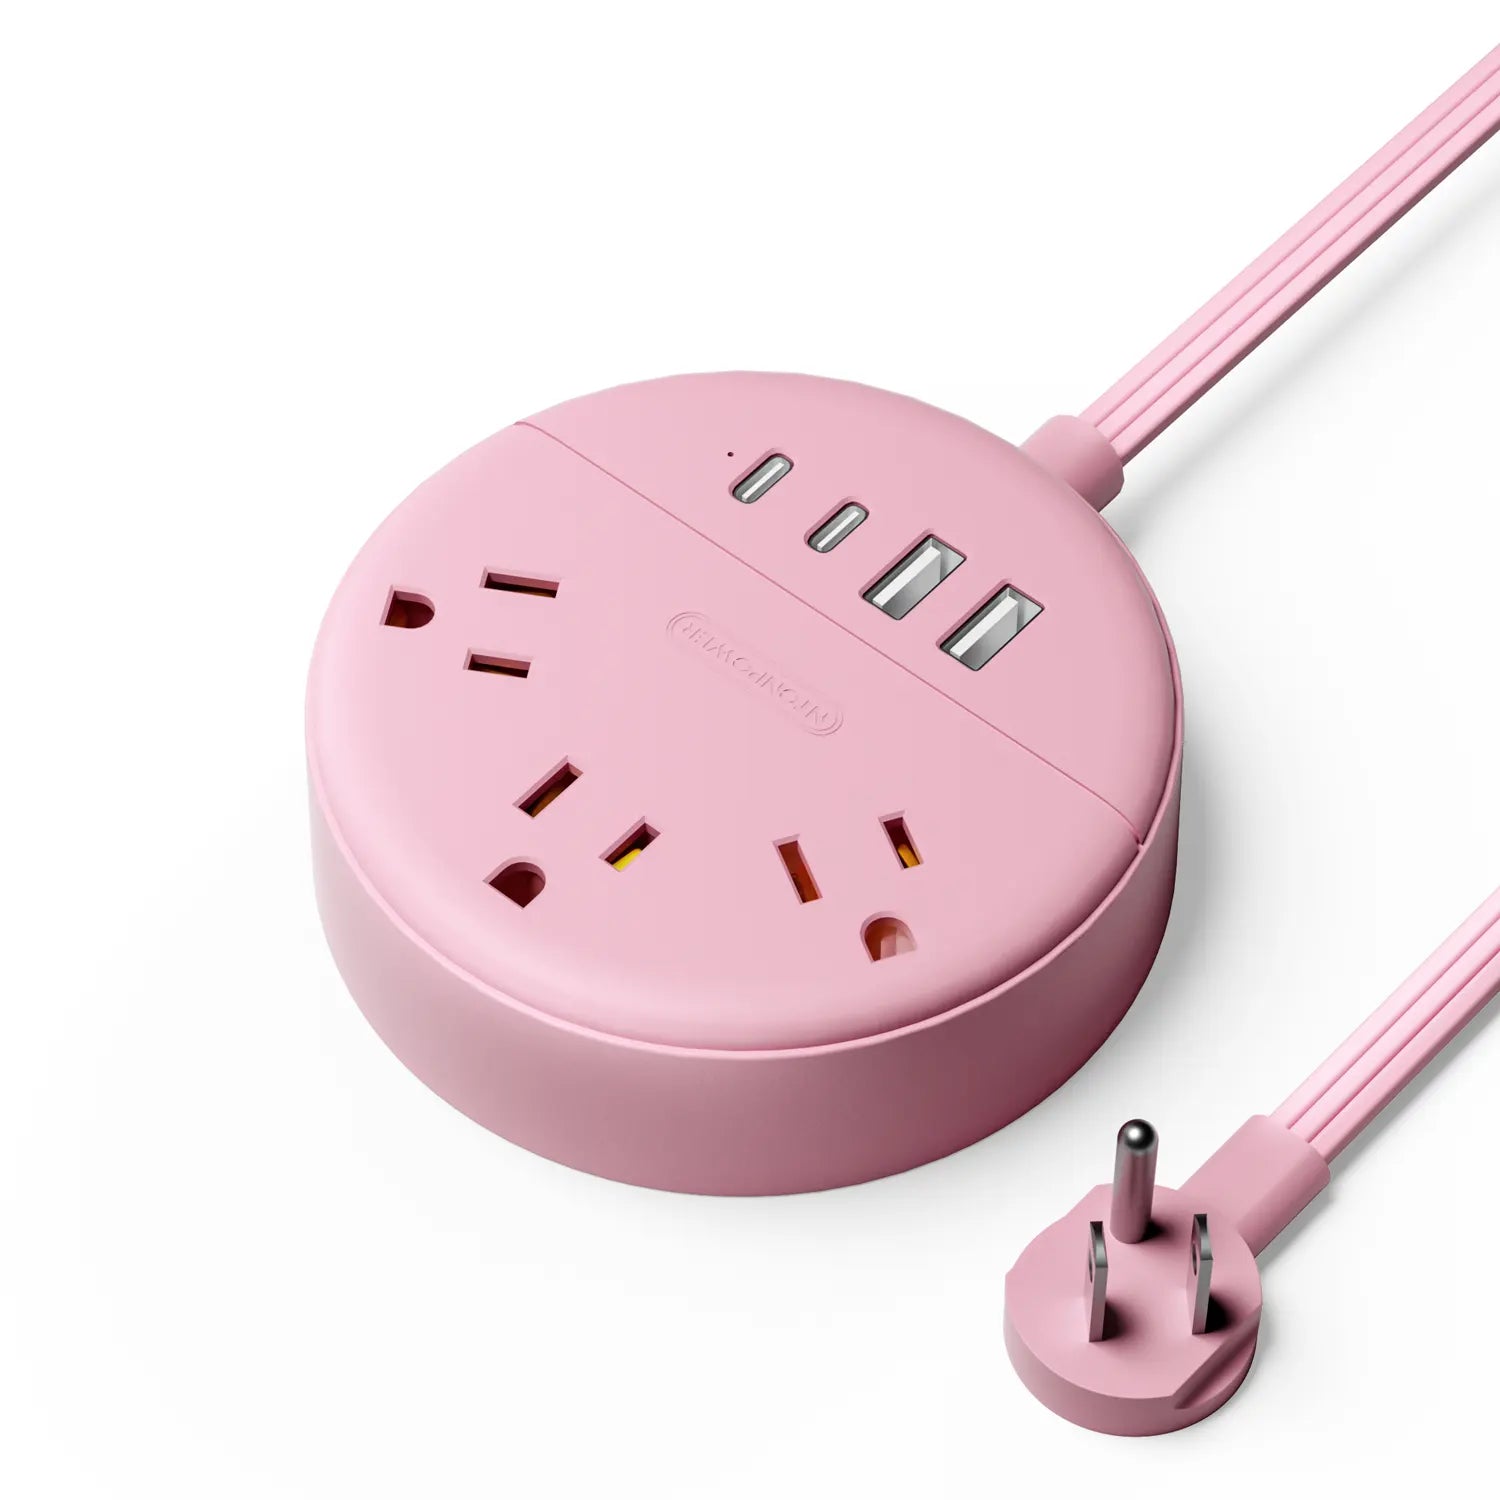 Ntonpower New Dot  Power Strip 3 Outlets 2 USB-A 2 USB-C Small&Travel